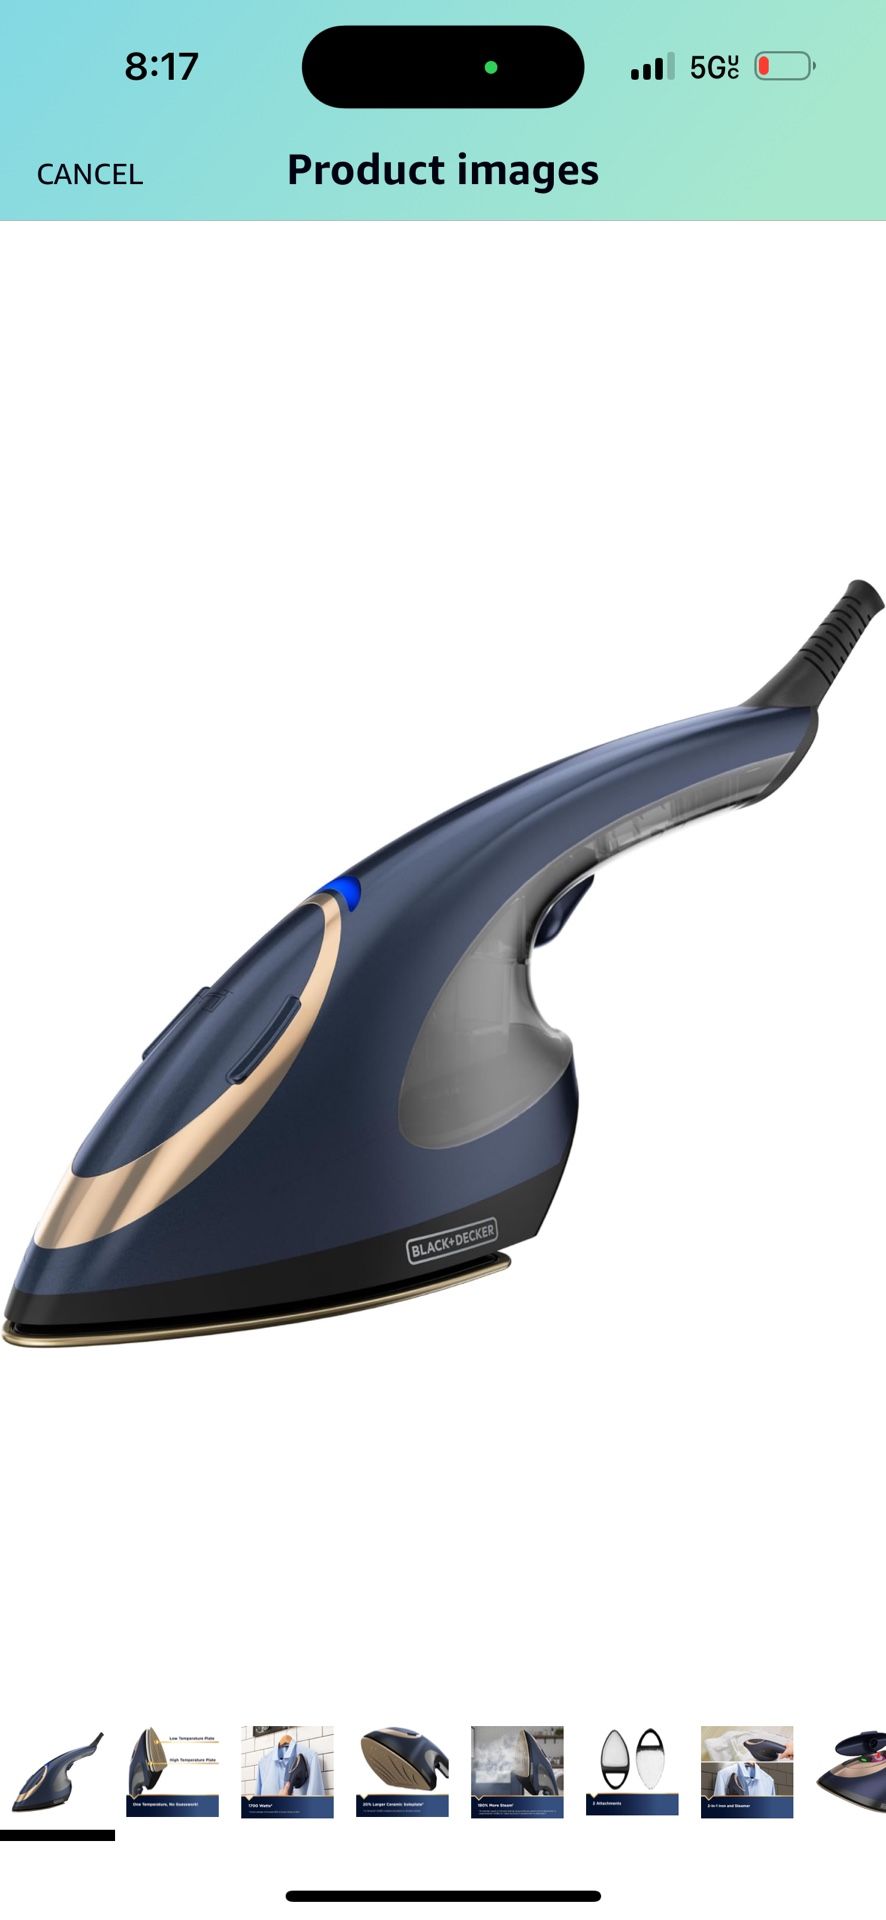 Press & Steam 2-in-1 Iron and Steamer, 180% More Steam & One Temperature Technology, Ceramic Soleplate, Safe on All Fabric Types